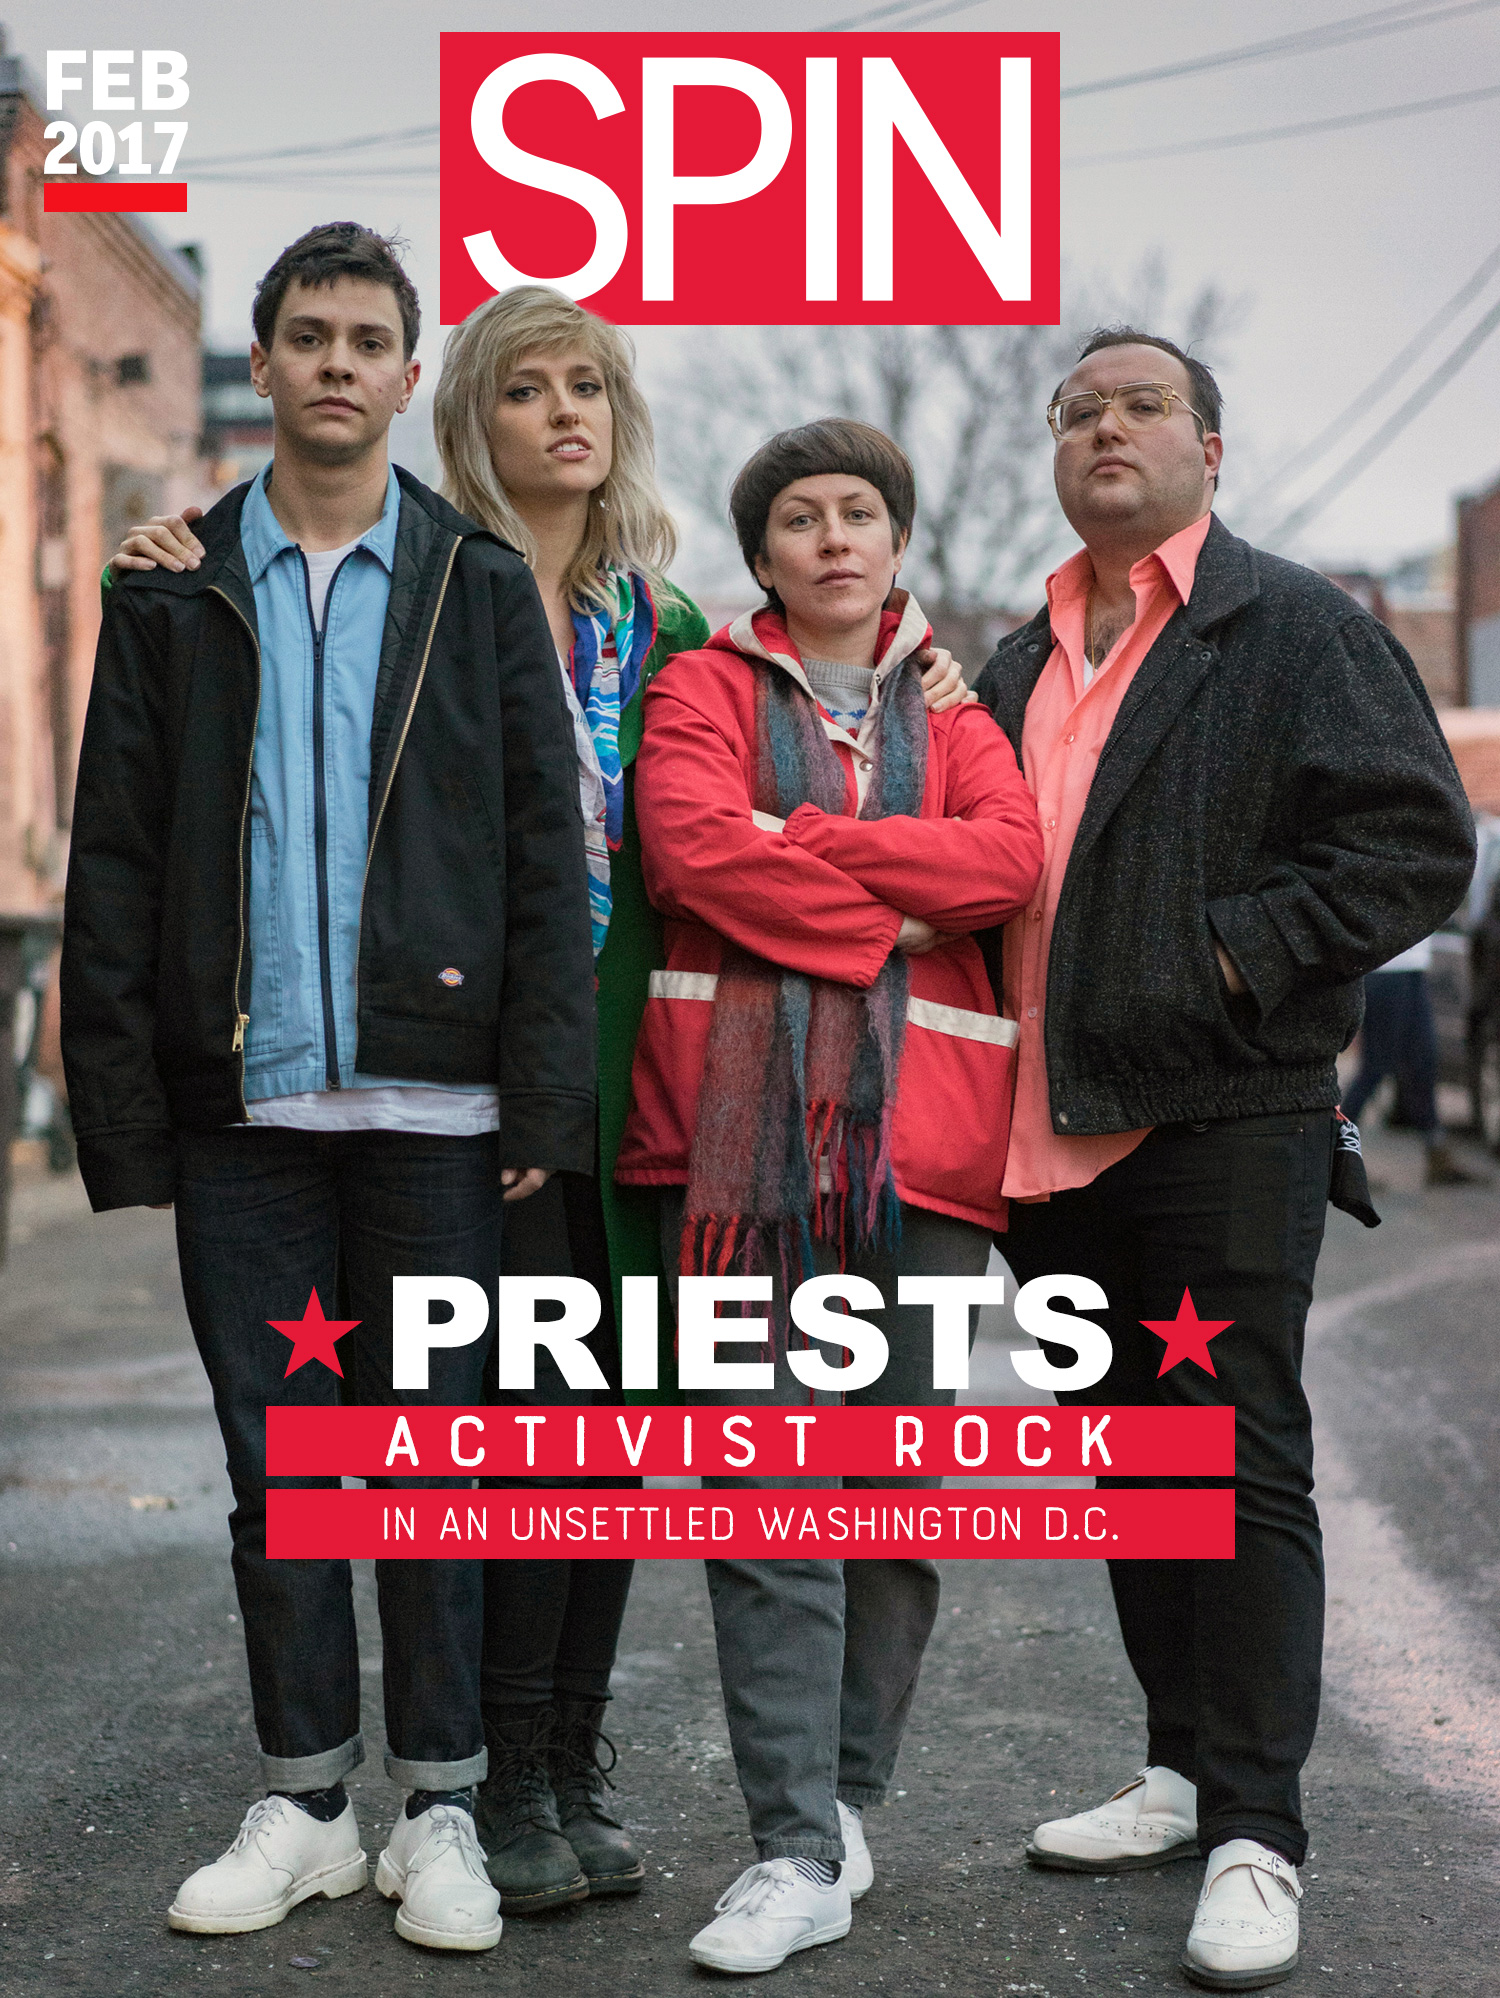 Priests' Activist Rock in an Unsettled D.C.